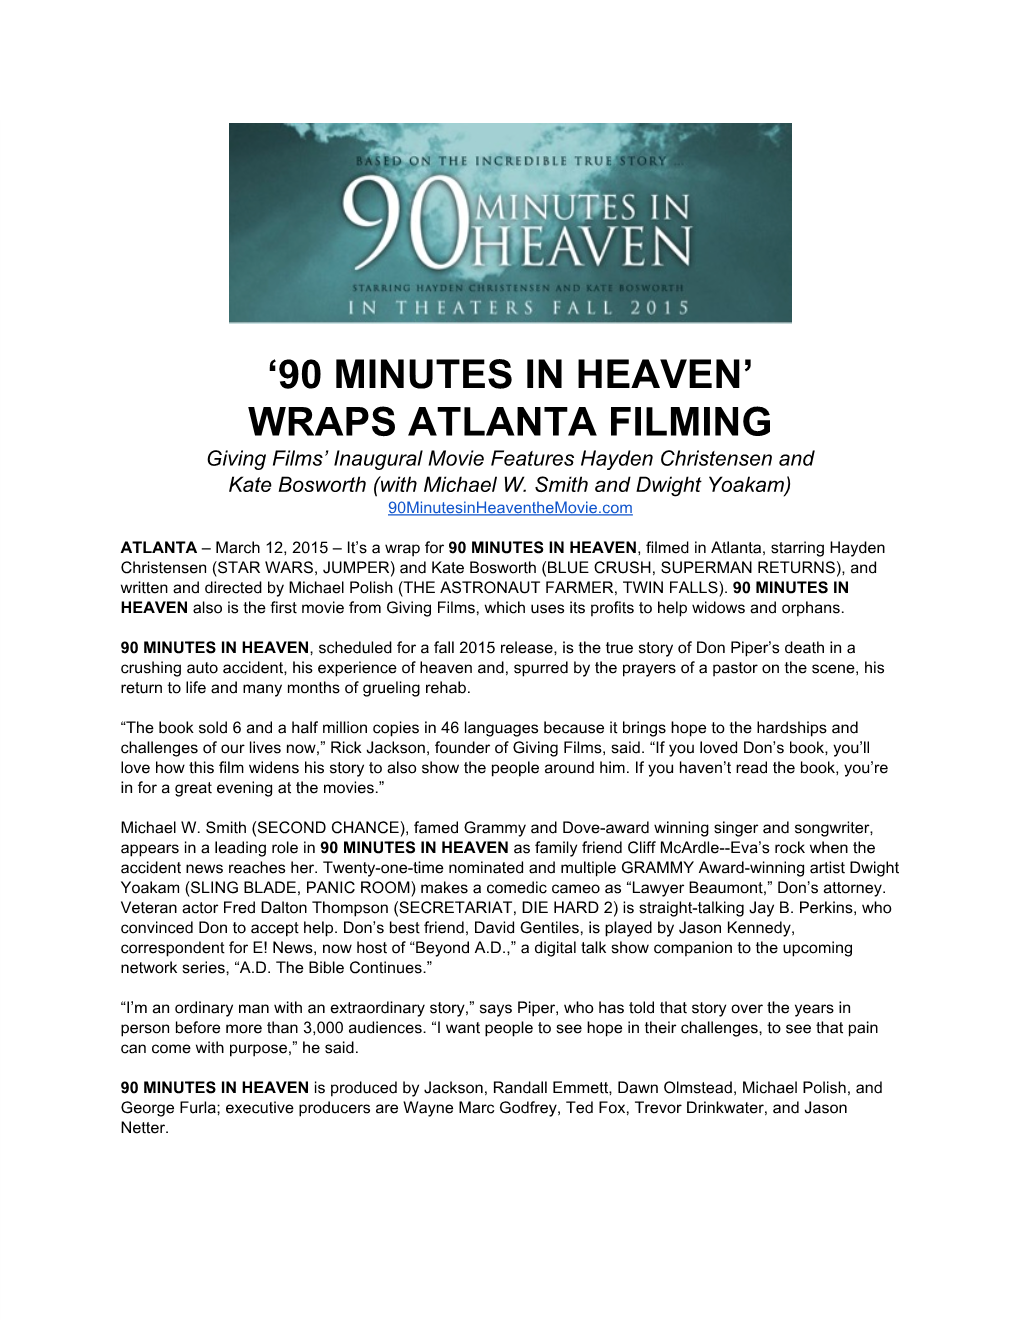 90 MINUTES in HEAVEN’ WRAPS ATLANTA FILMING Giving Films’ Inaugural Movie Features Hayden Christensen and Kate Bosworth (With Michael W